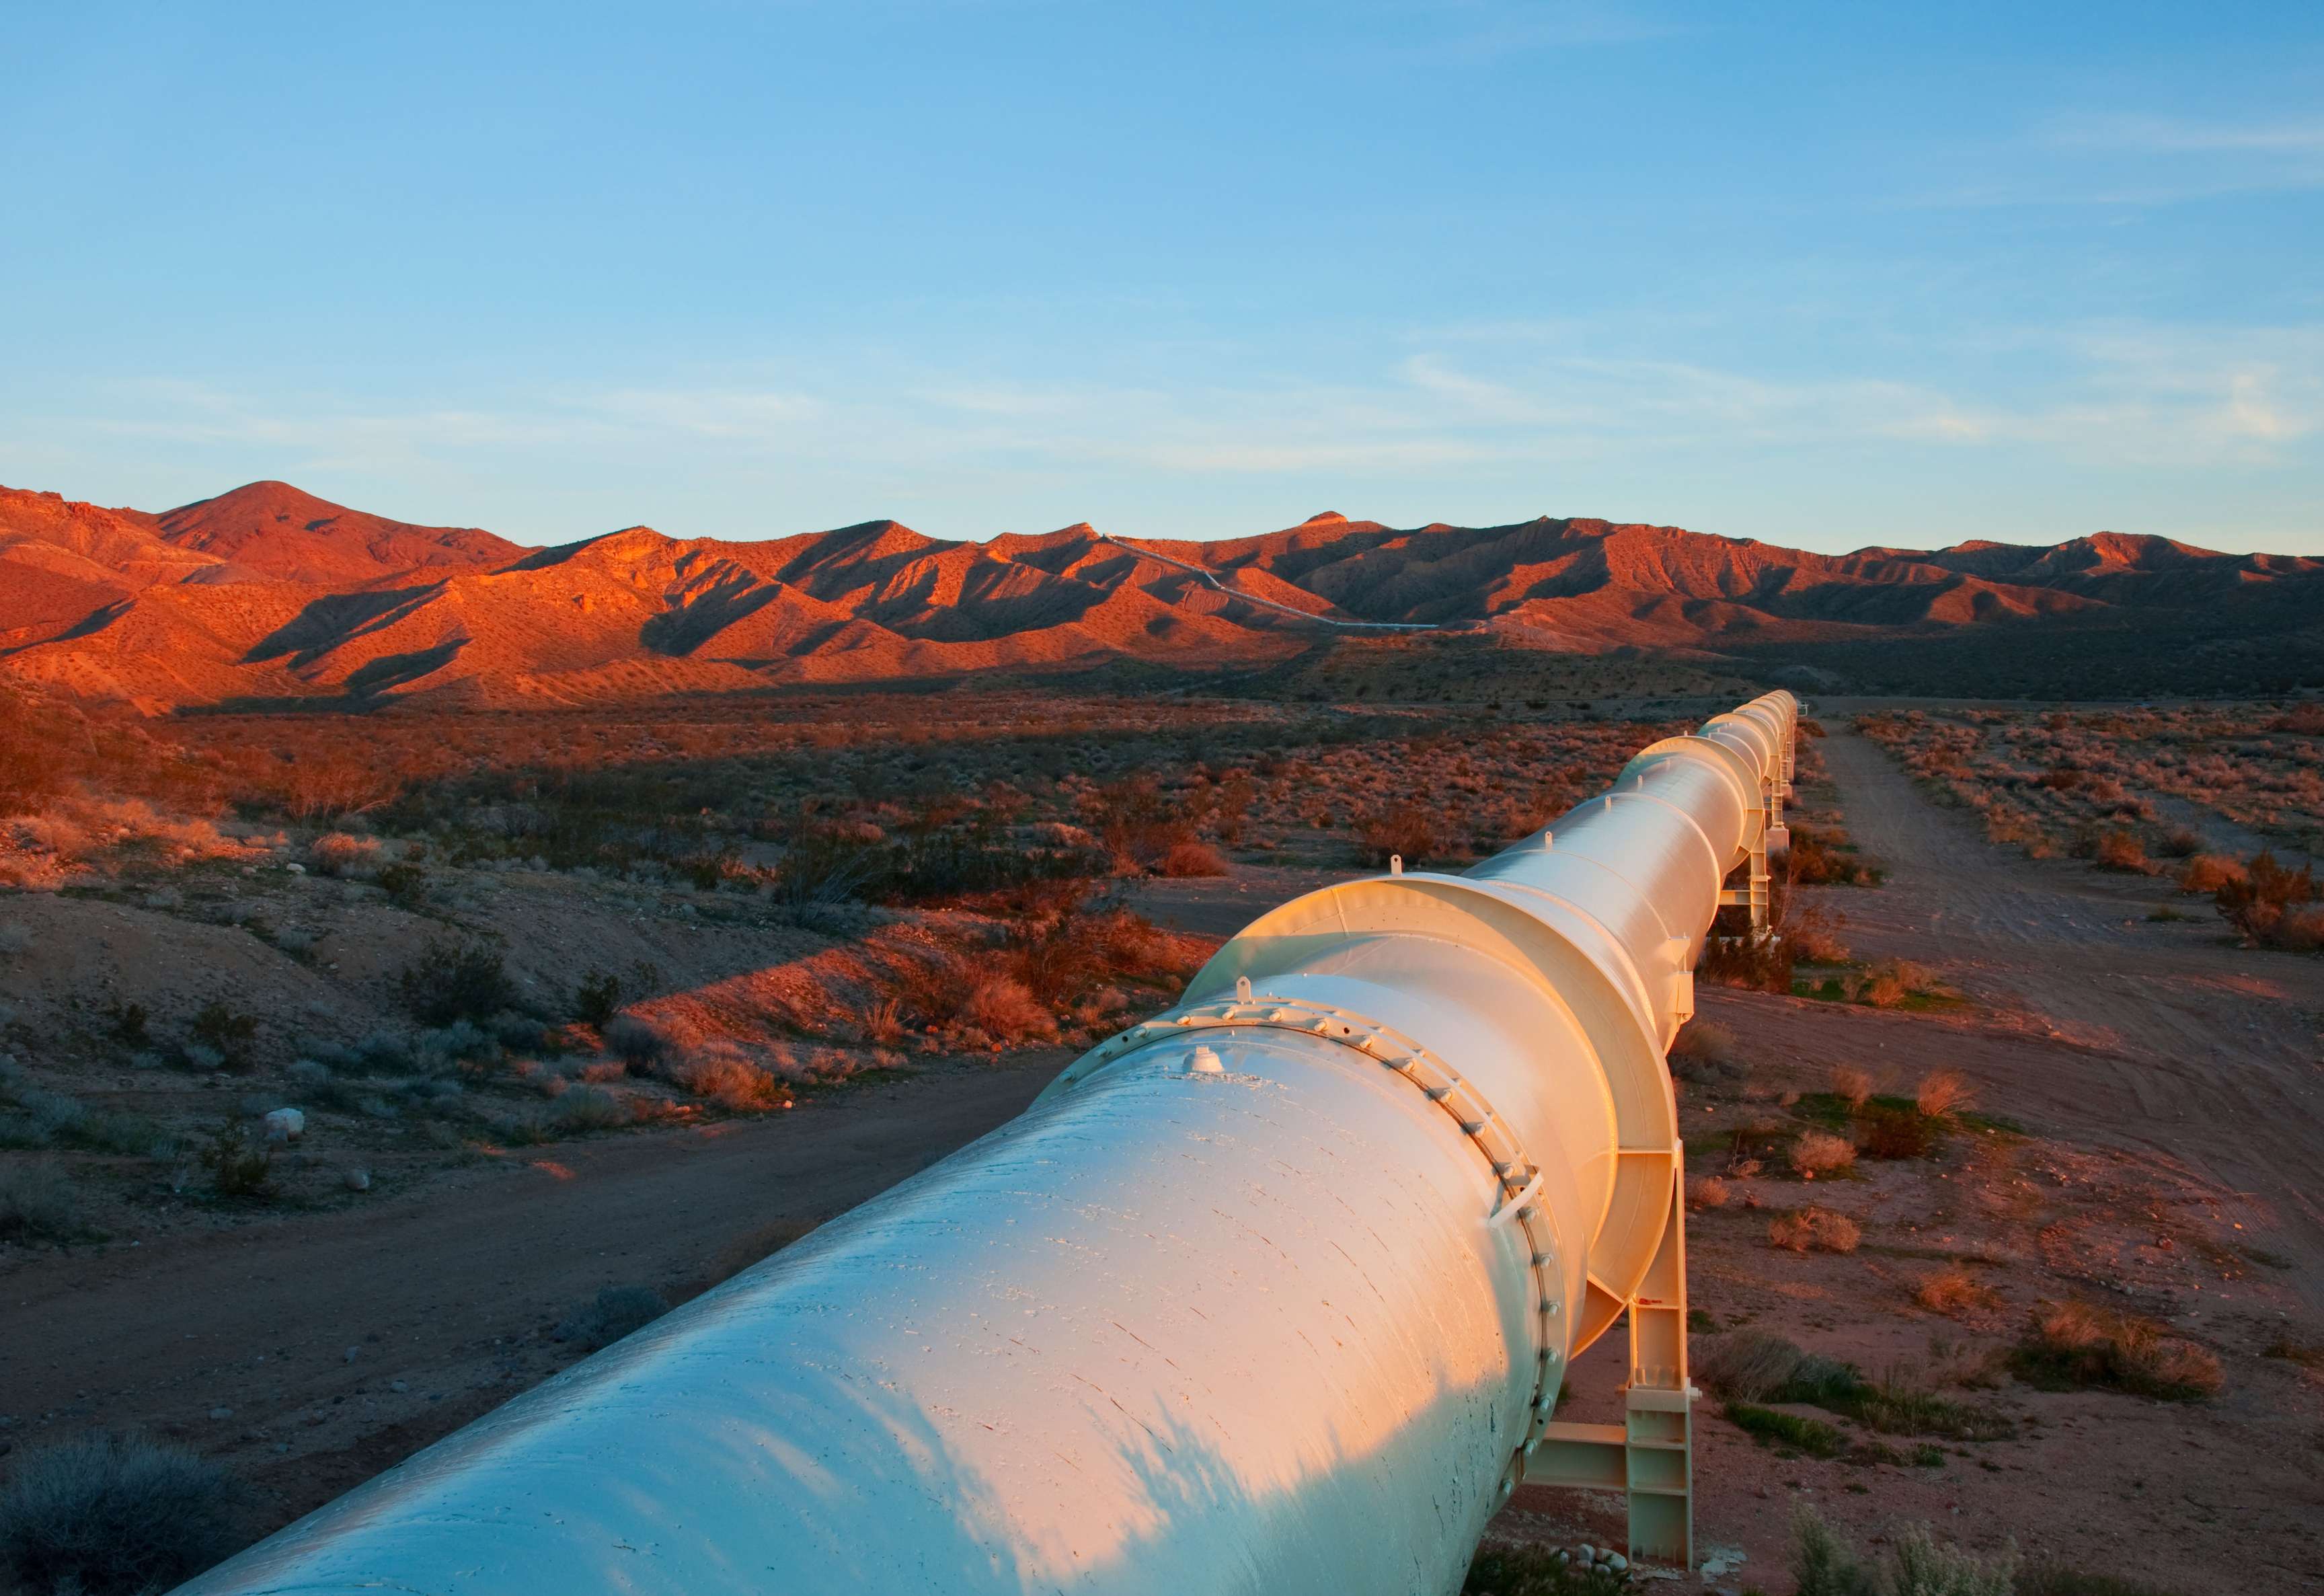 Pipeline leads through dry hilly landscape at sunset.